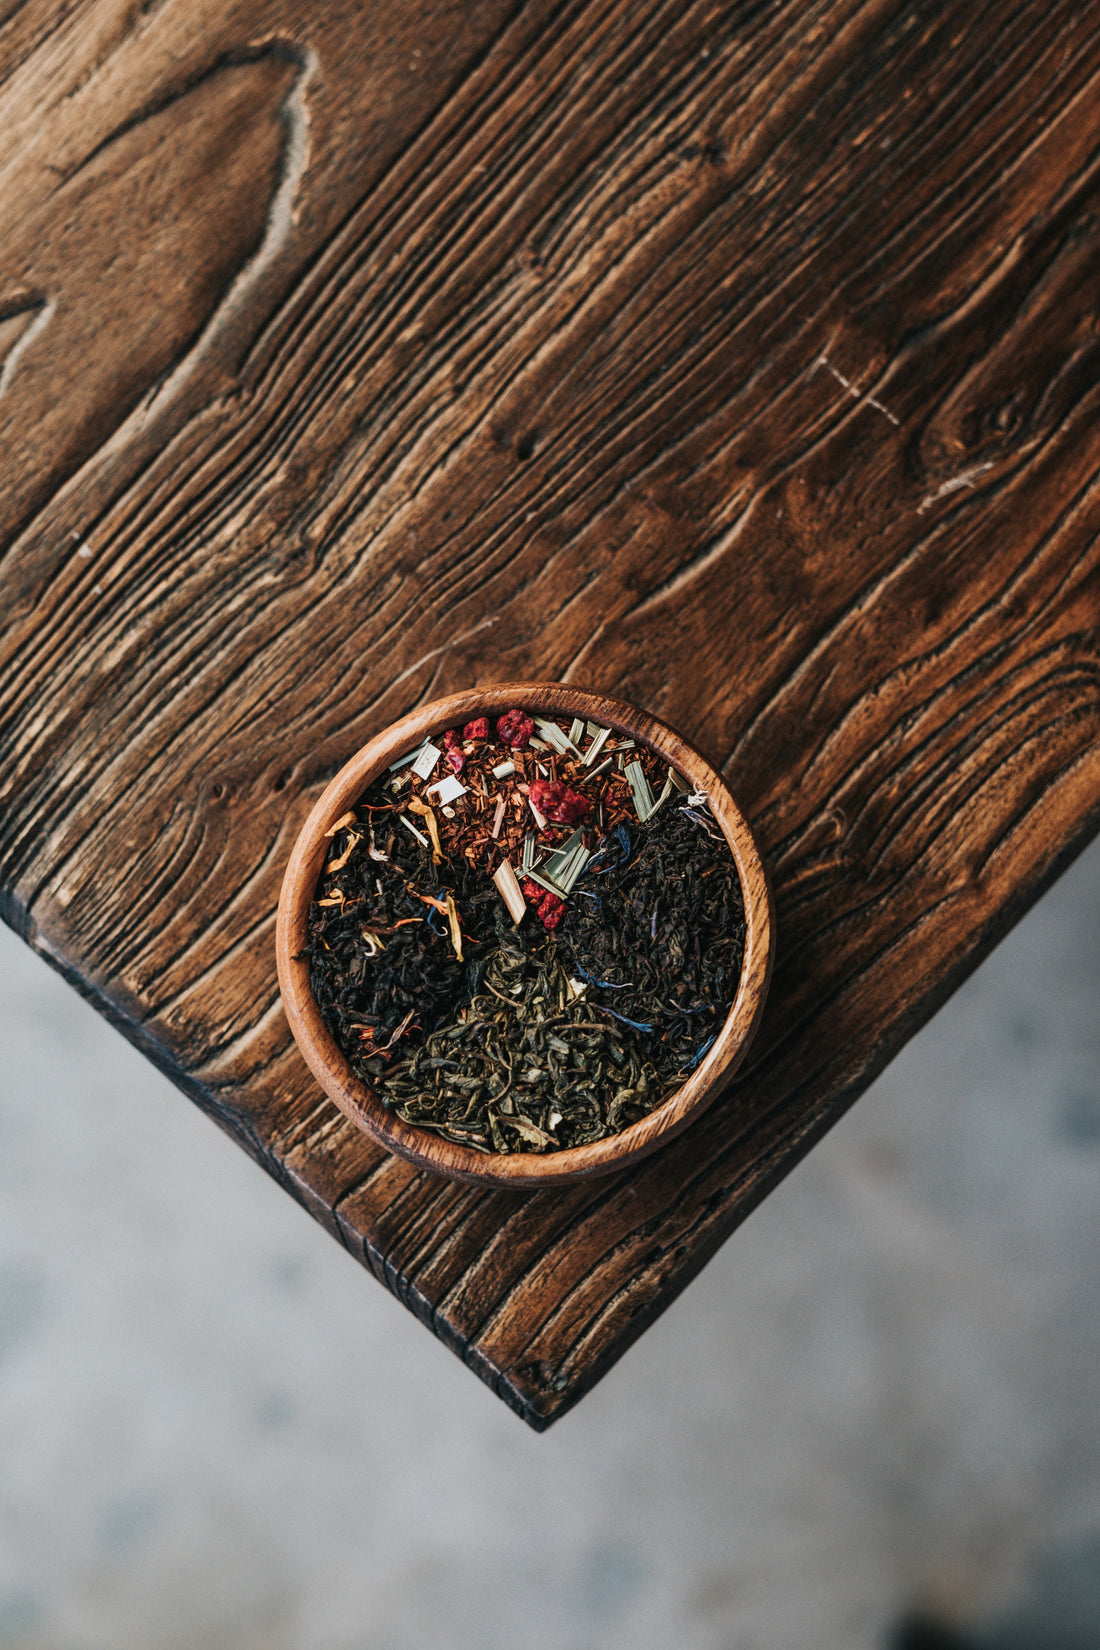 Herbal tea ceremony using adaptogens. What are adaptogens and how do they work in the body? Our blog will illuminate the wondrous healing potential which this class of amazing herbal and mushroom medicines have to offer us. Photography by Nathan Dumlao